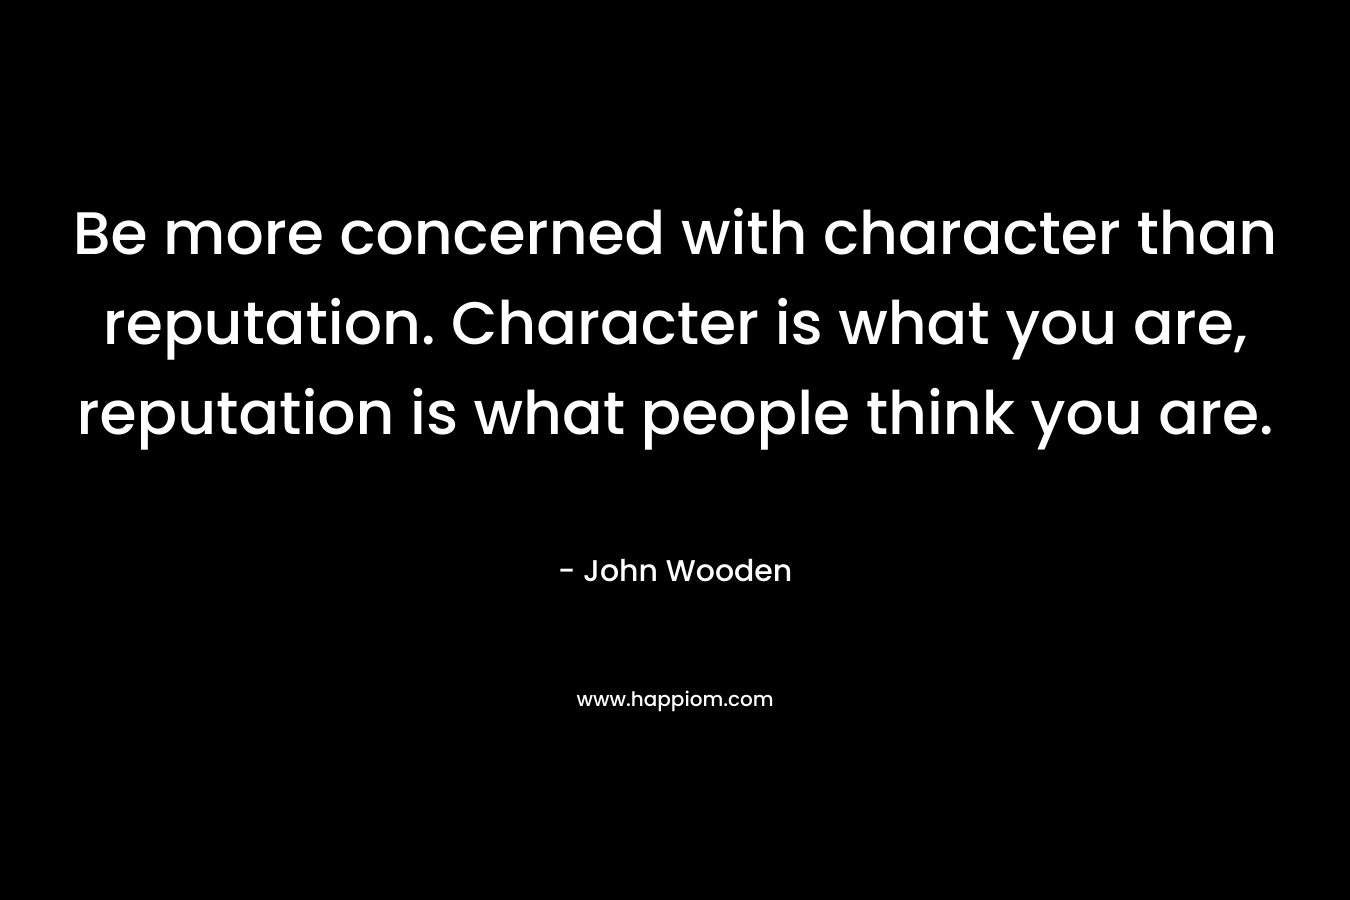 Be more concerned with character than reputation. Character is what you are, reputation is what people think you are. – John Wooden